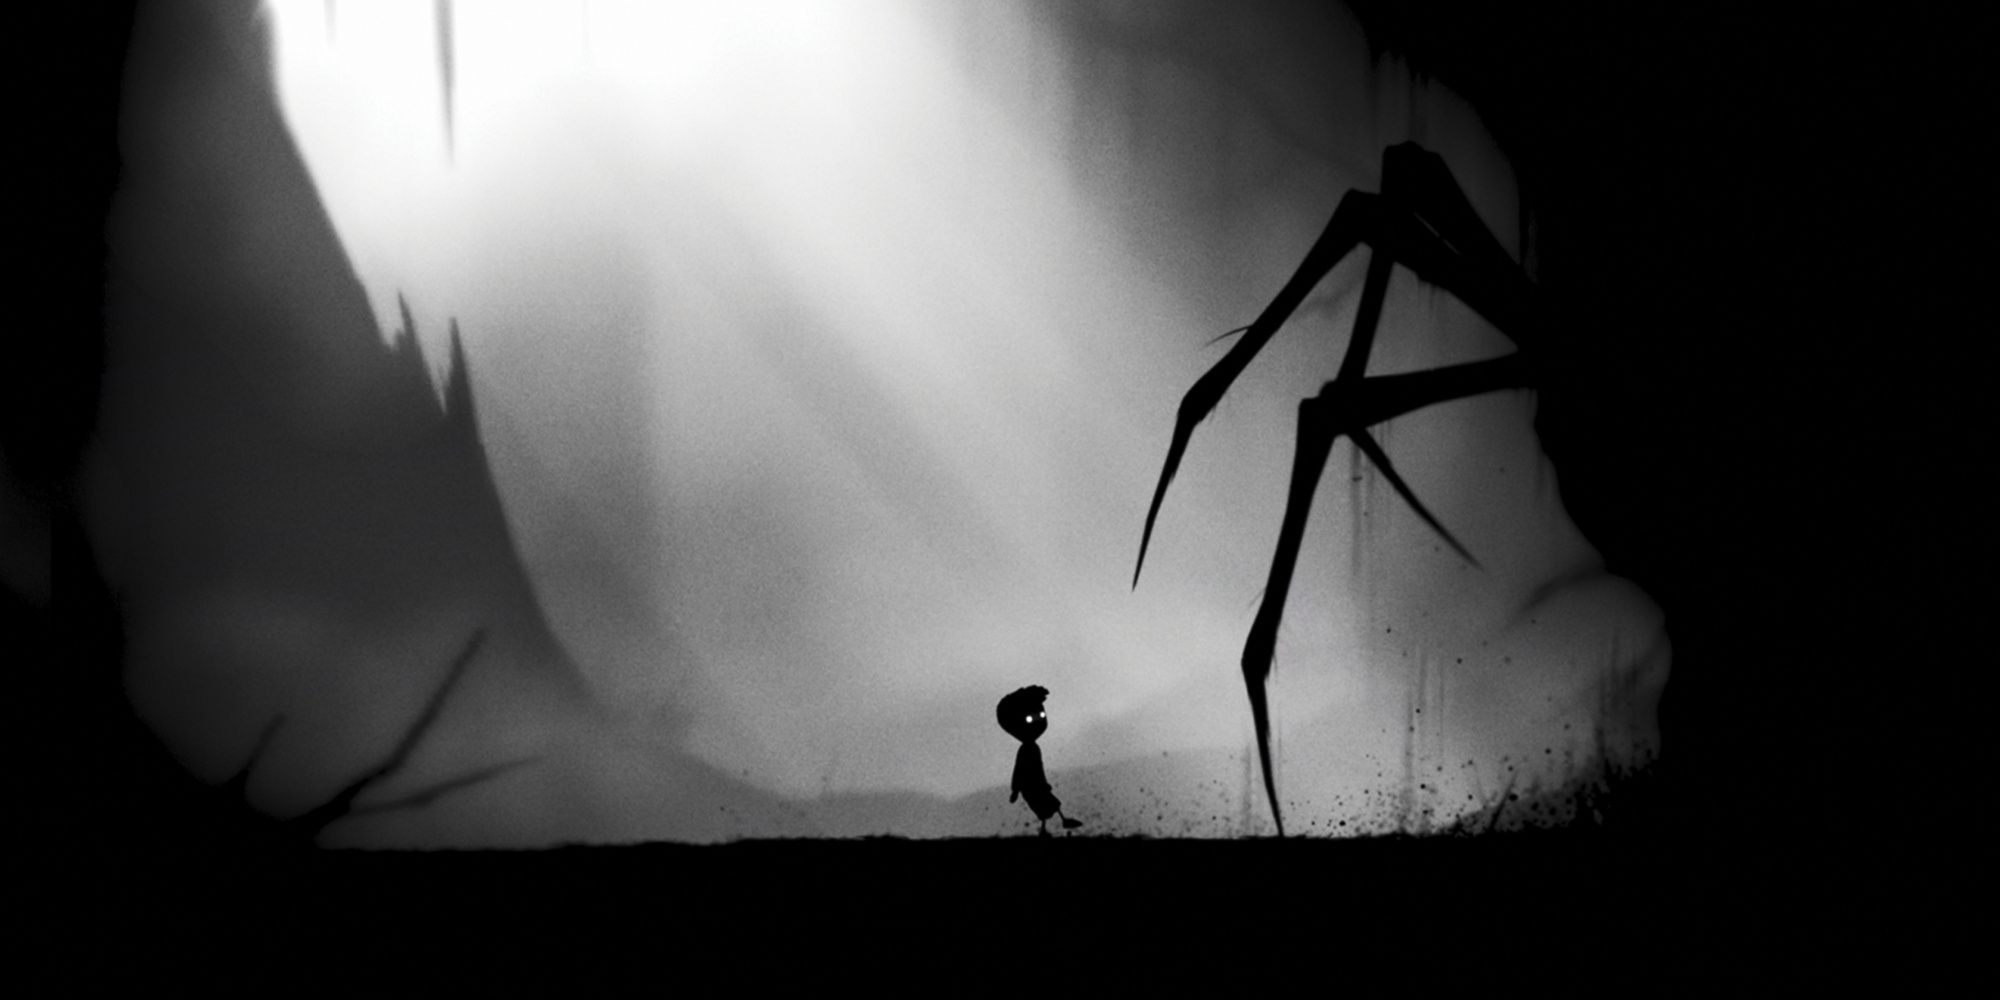 The boy stares up at an emerging giant spider in a dark and barren landscape.